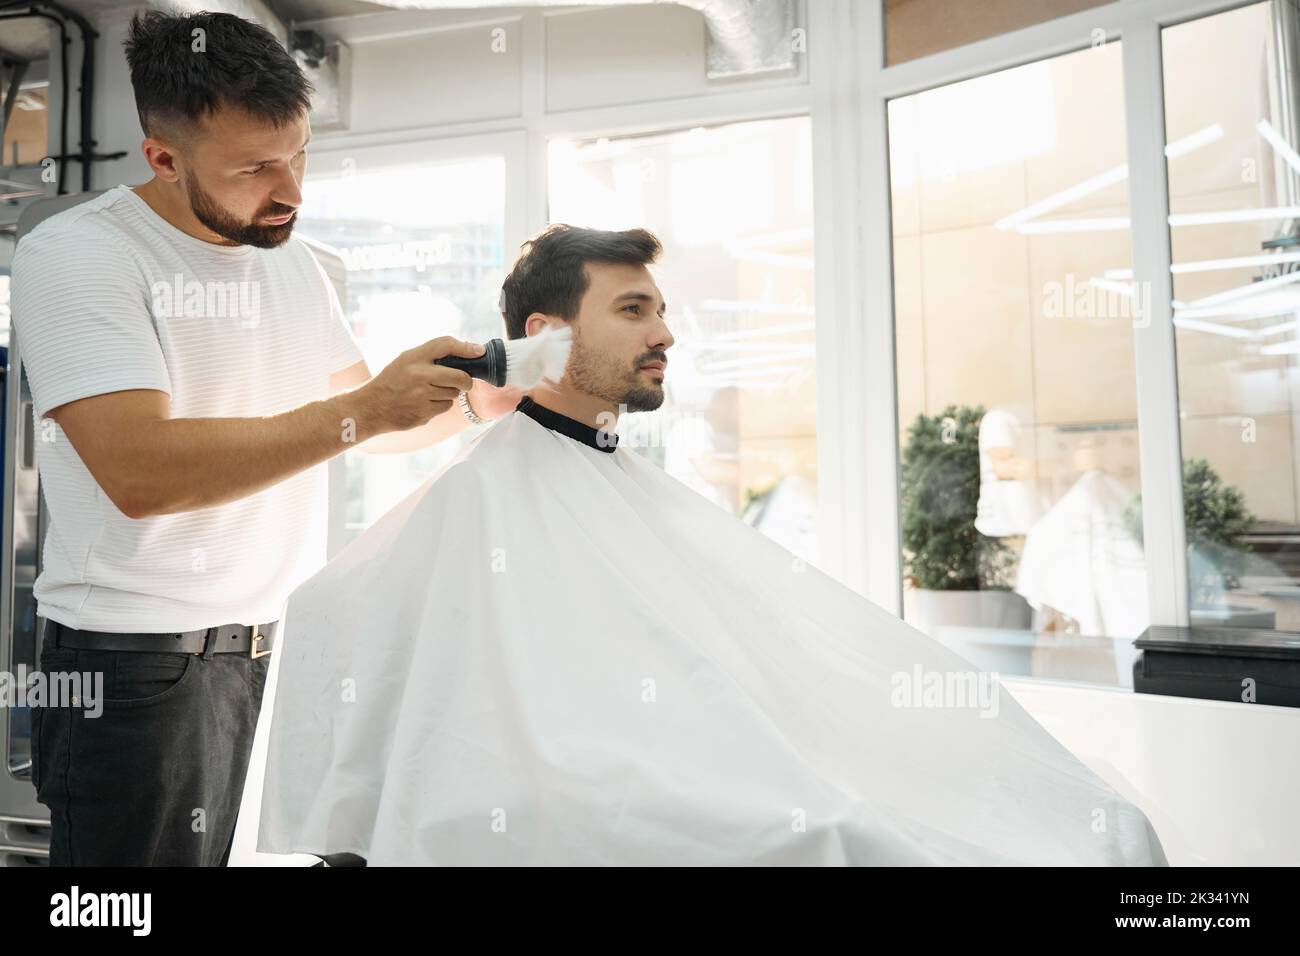 Professional barber sweeping pieces of shaved hair off of client Stock Photo